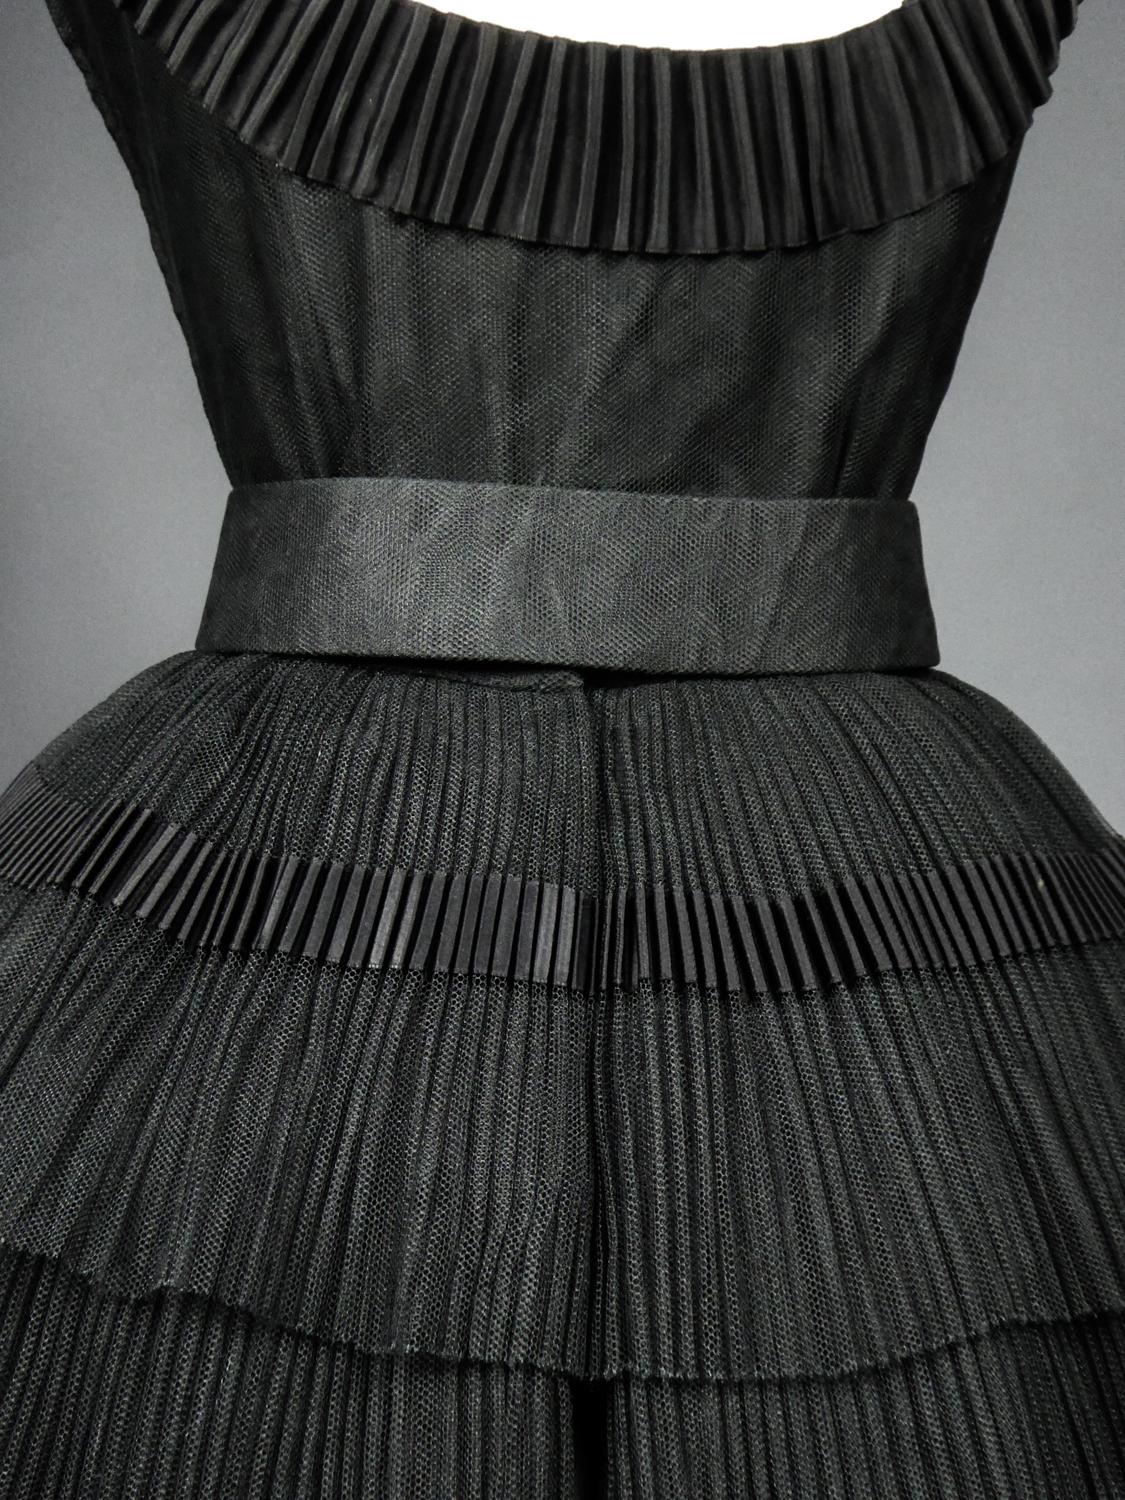 A Nina Ricci Couture Cocktail Dress in Embossed Tulle and Ribbon Circa 1958/1962 5